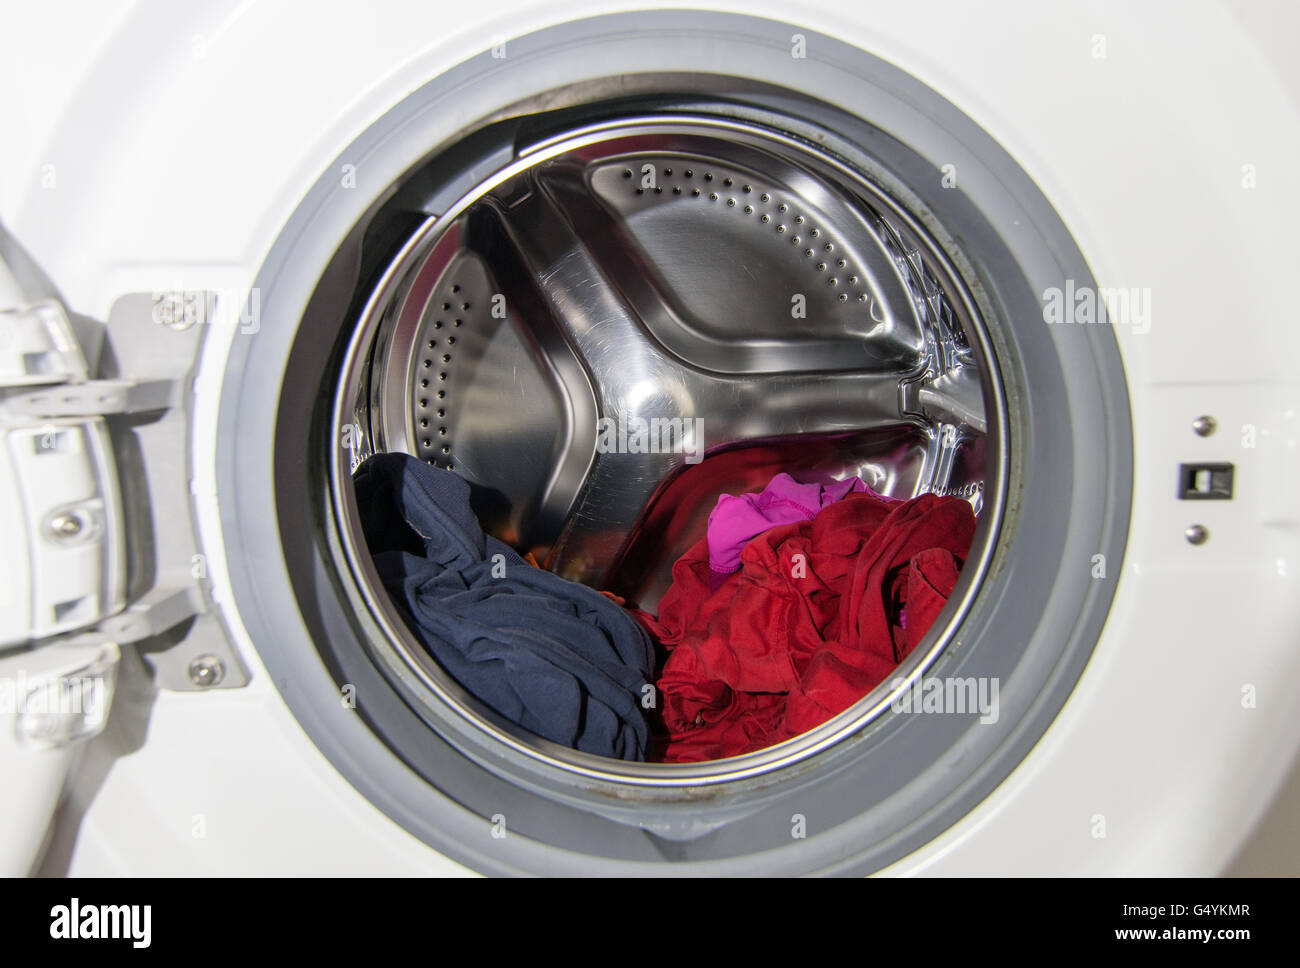 View of the interior of a domestic front loading washing machine with wet laundry inside it. Stock Photo